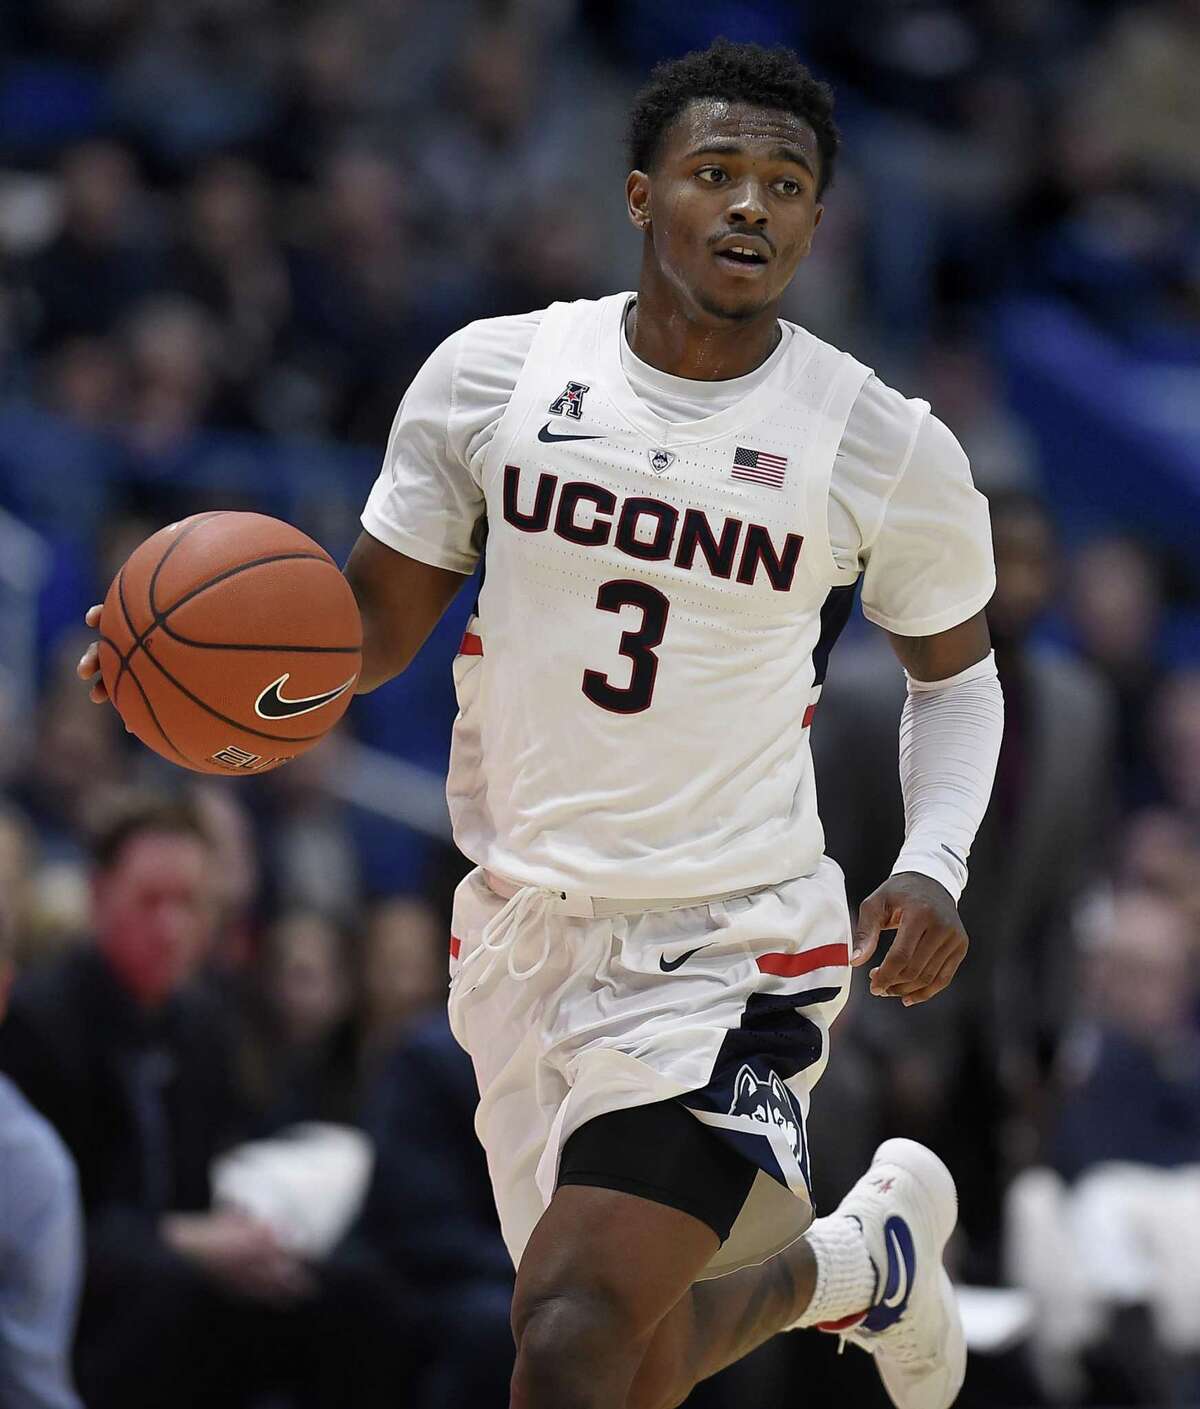 UConn’s Alterique Gilbert dribbles up the court during the second half against New Hampshire on Saturday.